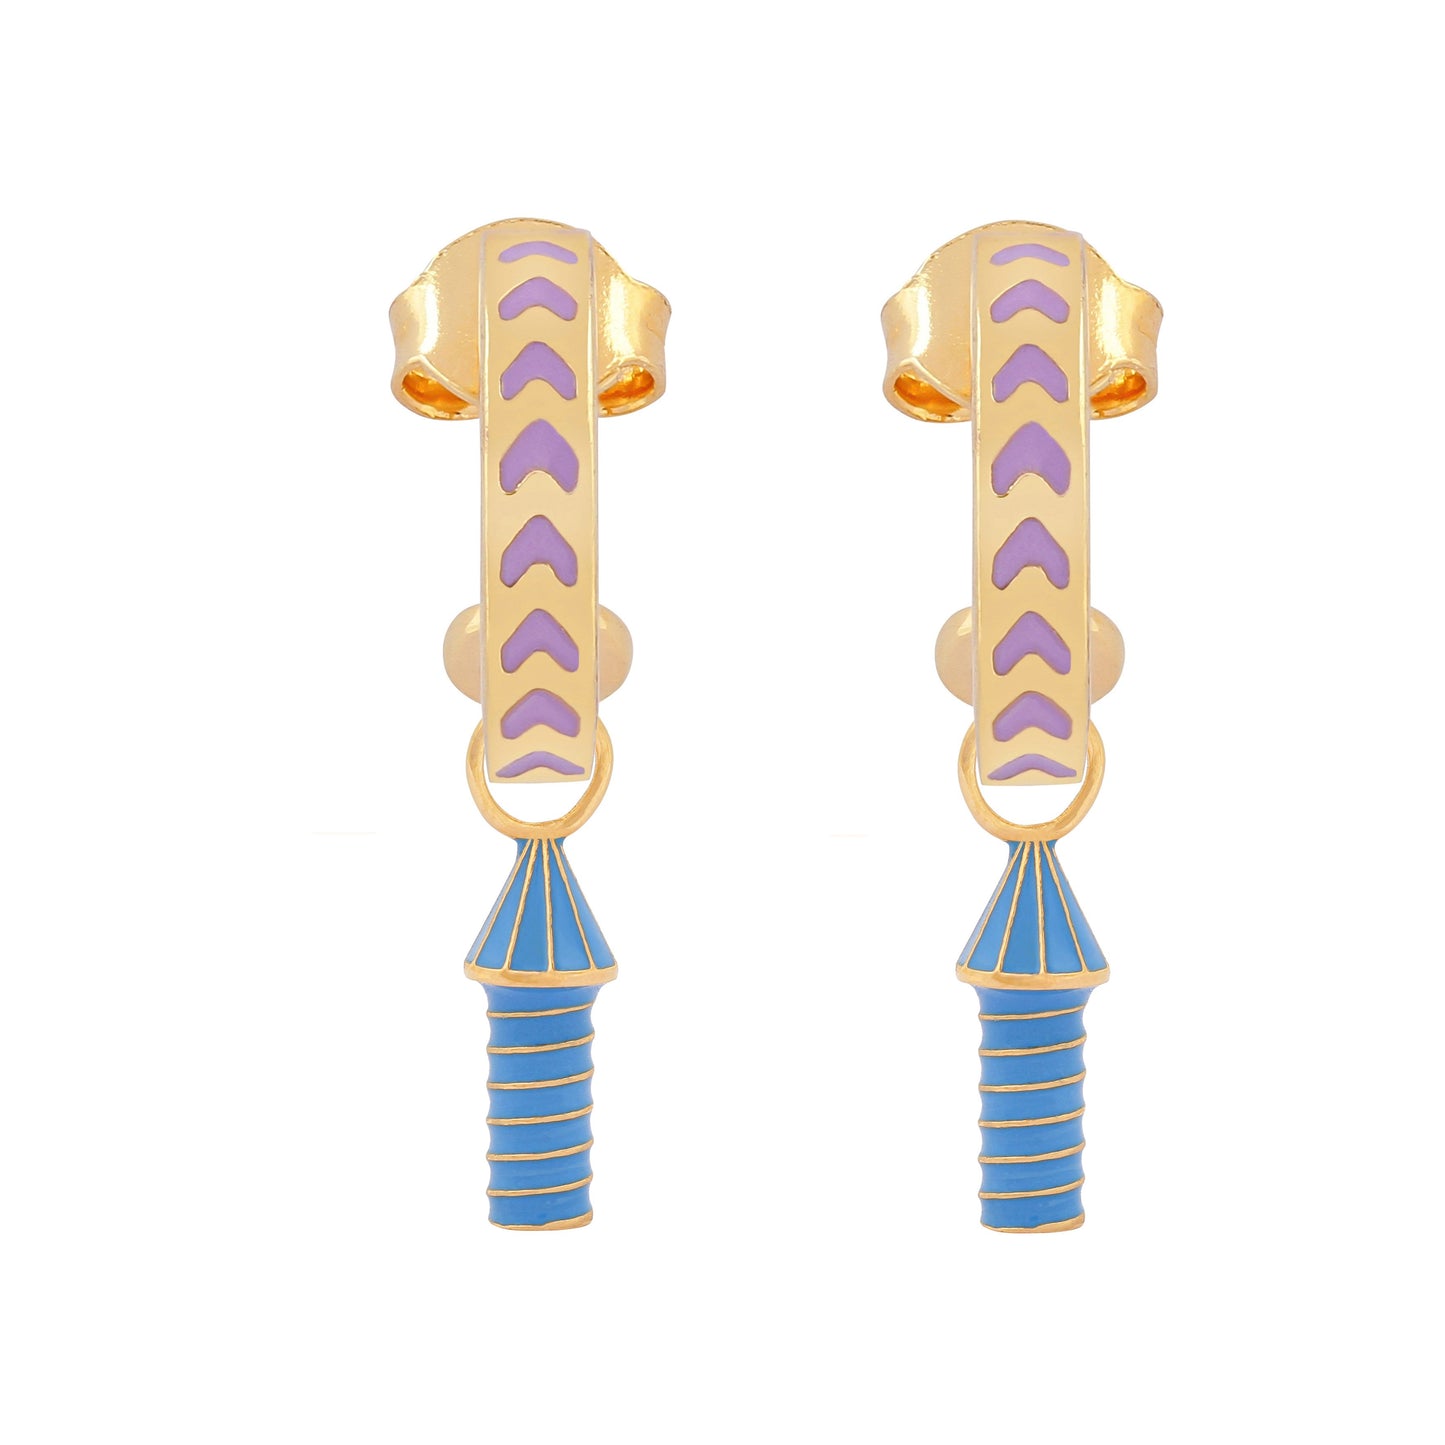 image of rocket enamel earrings in purple, blue and gold on white background